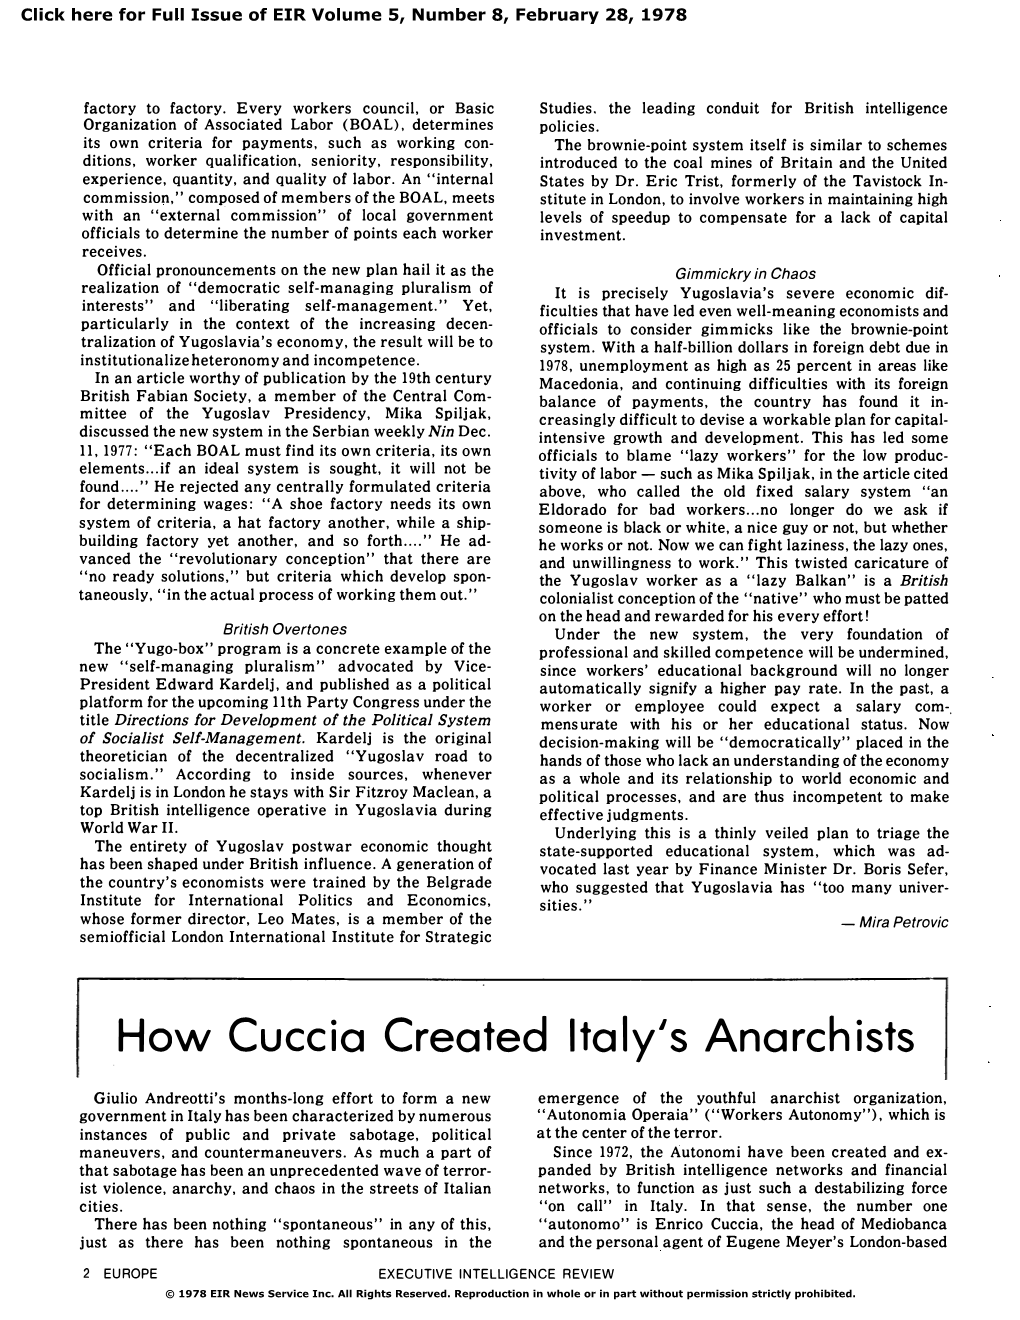 How Cuccia Created Italy's Anarchists